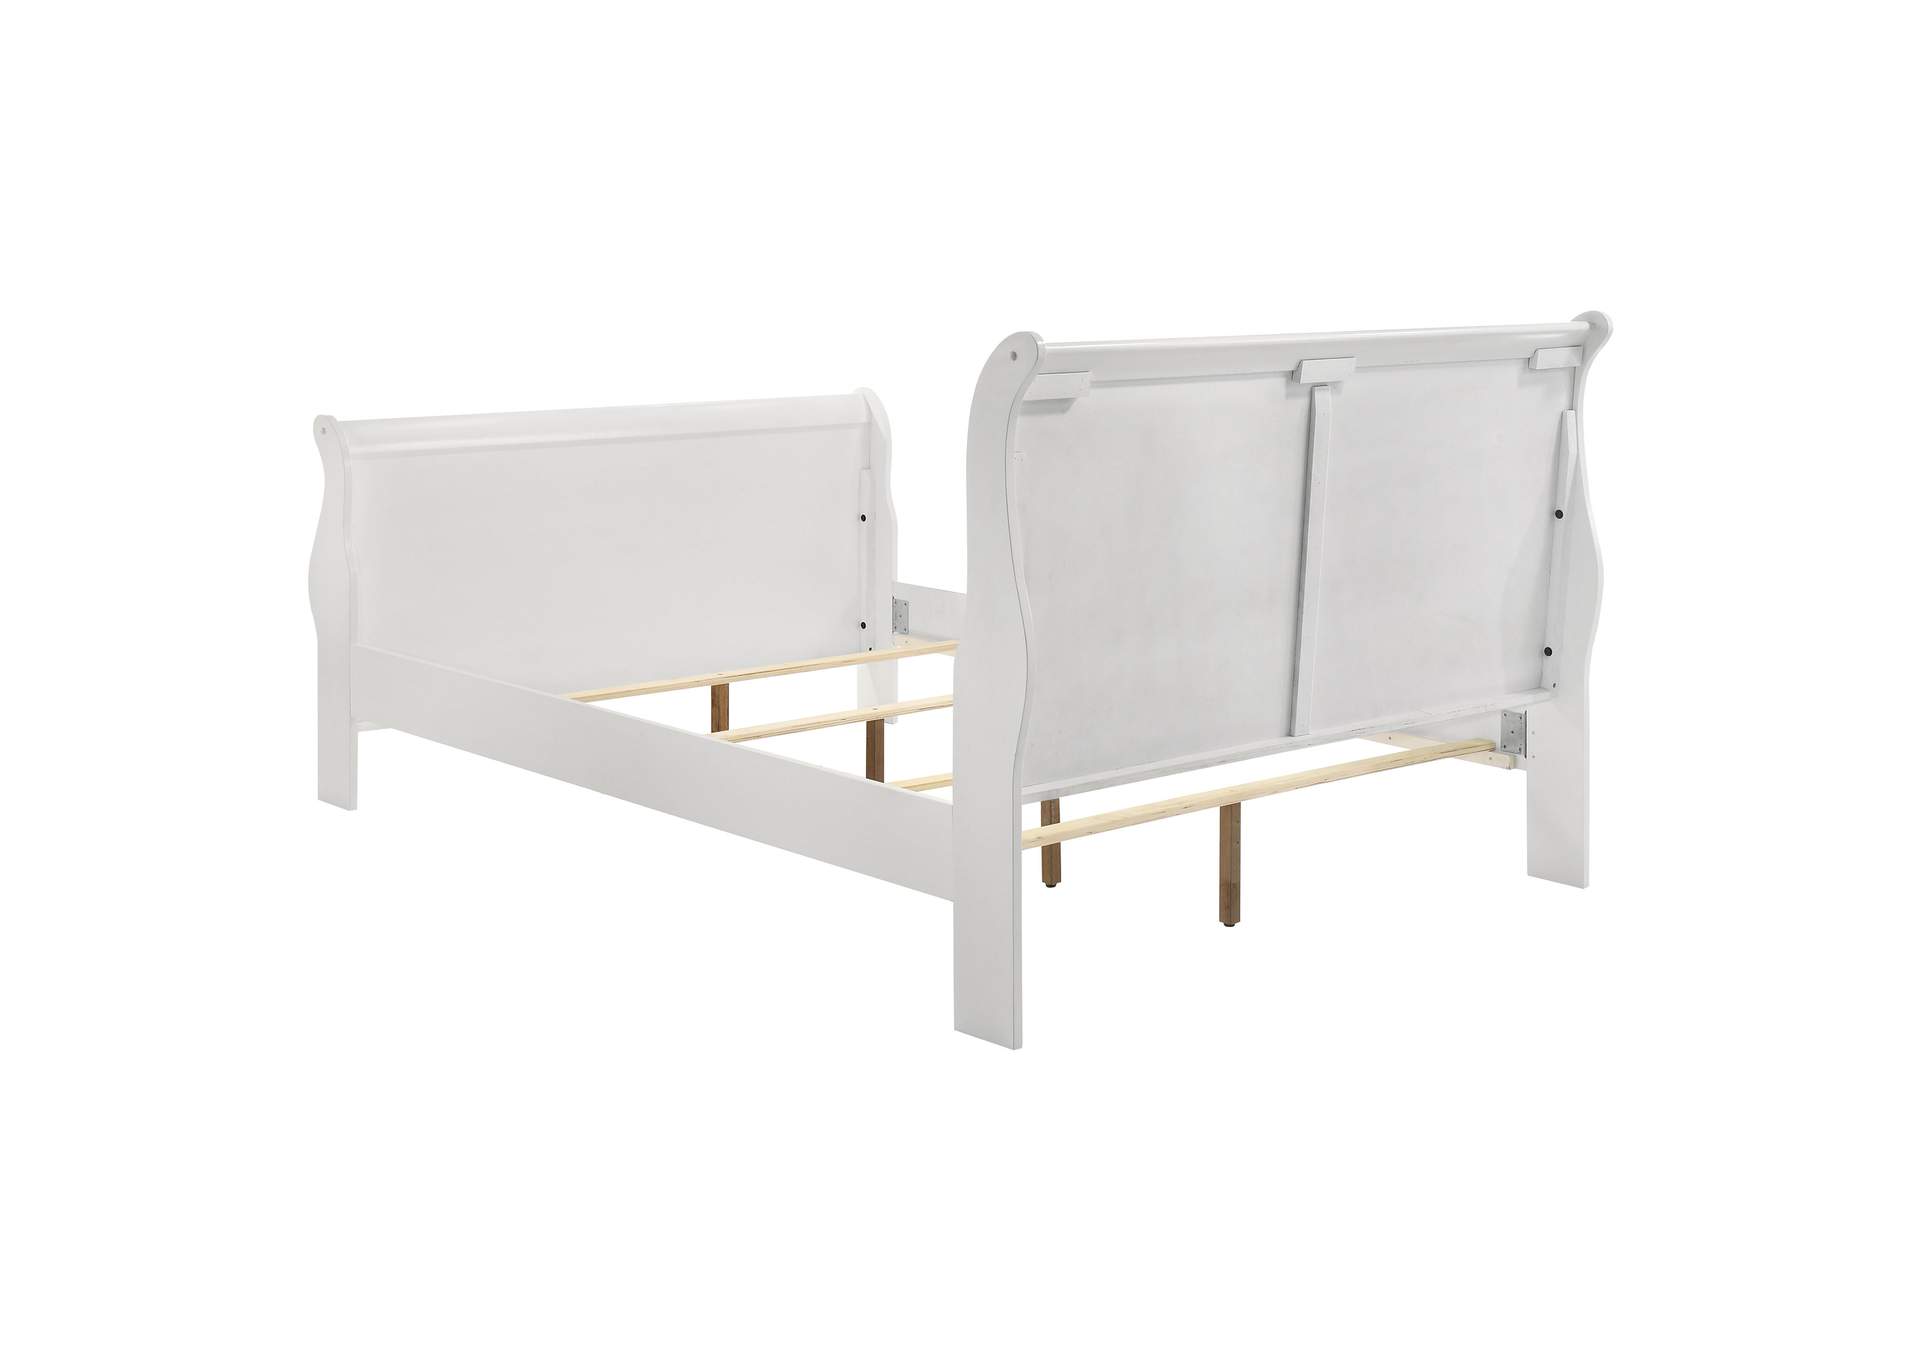 Louis Philippe Full Sleigh Panel Bed White,Coaster Furniture